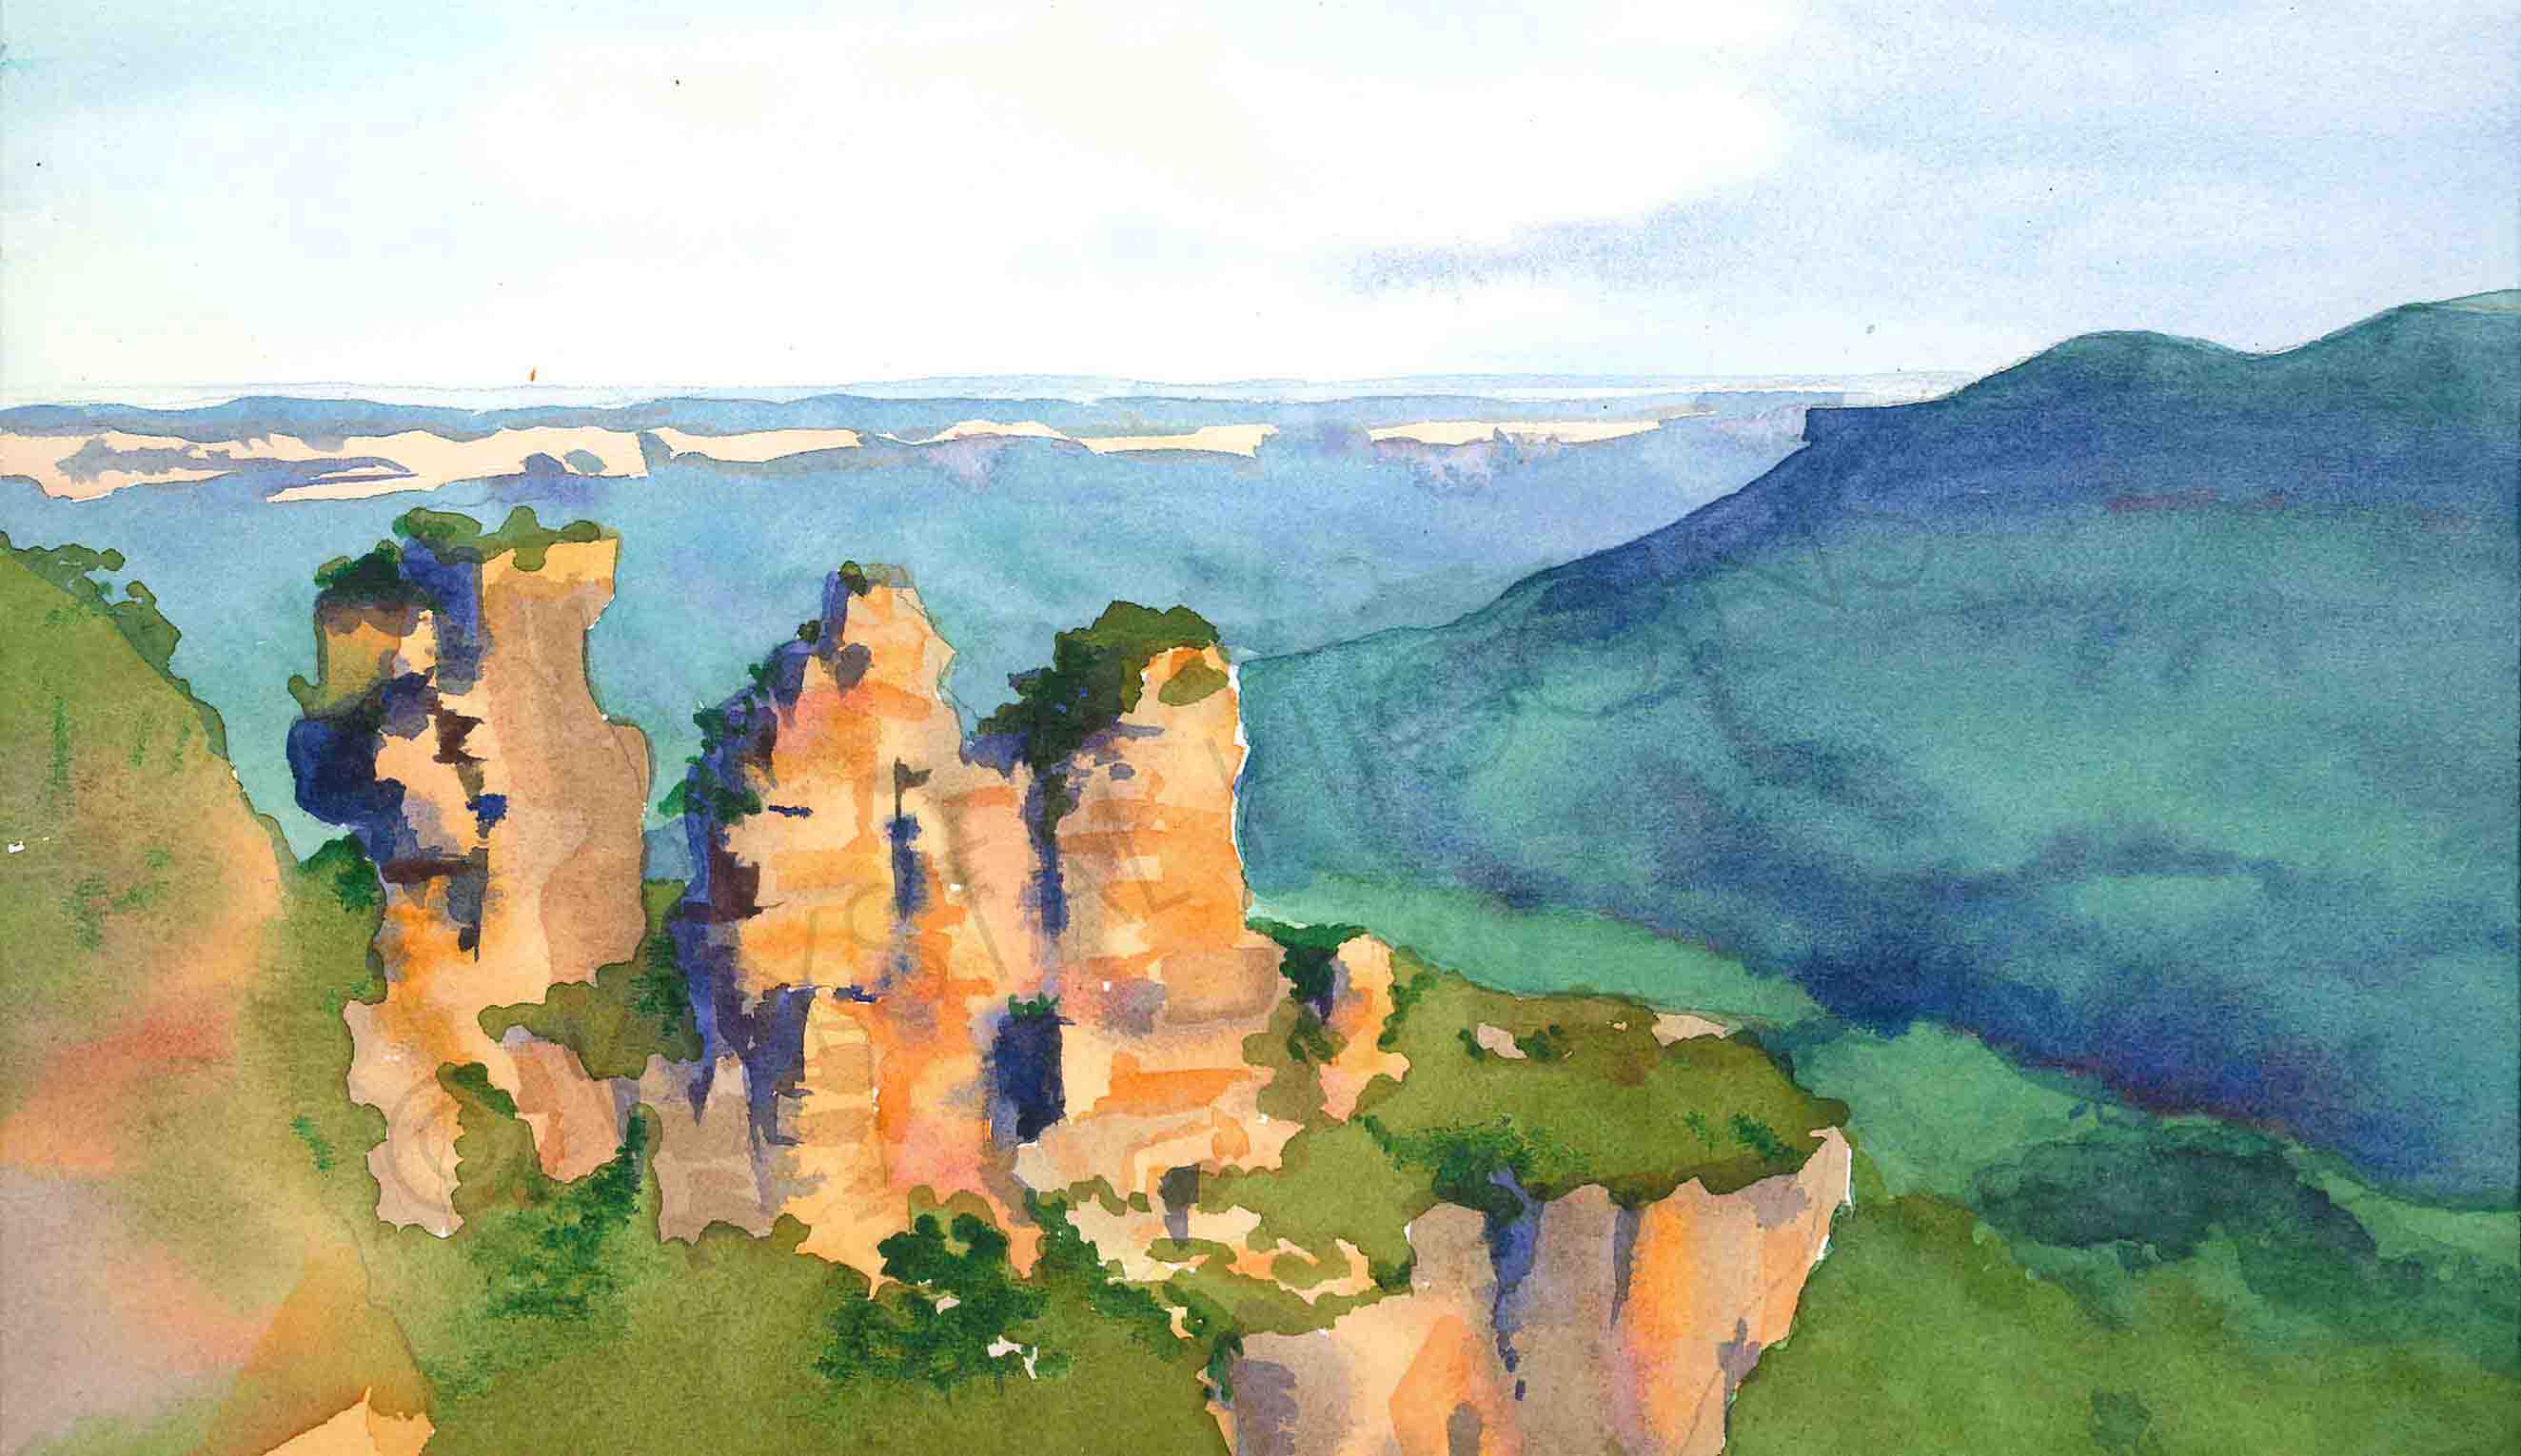 A scan of a painting of the Three Sisters in the Blue Mountains, Australia